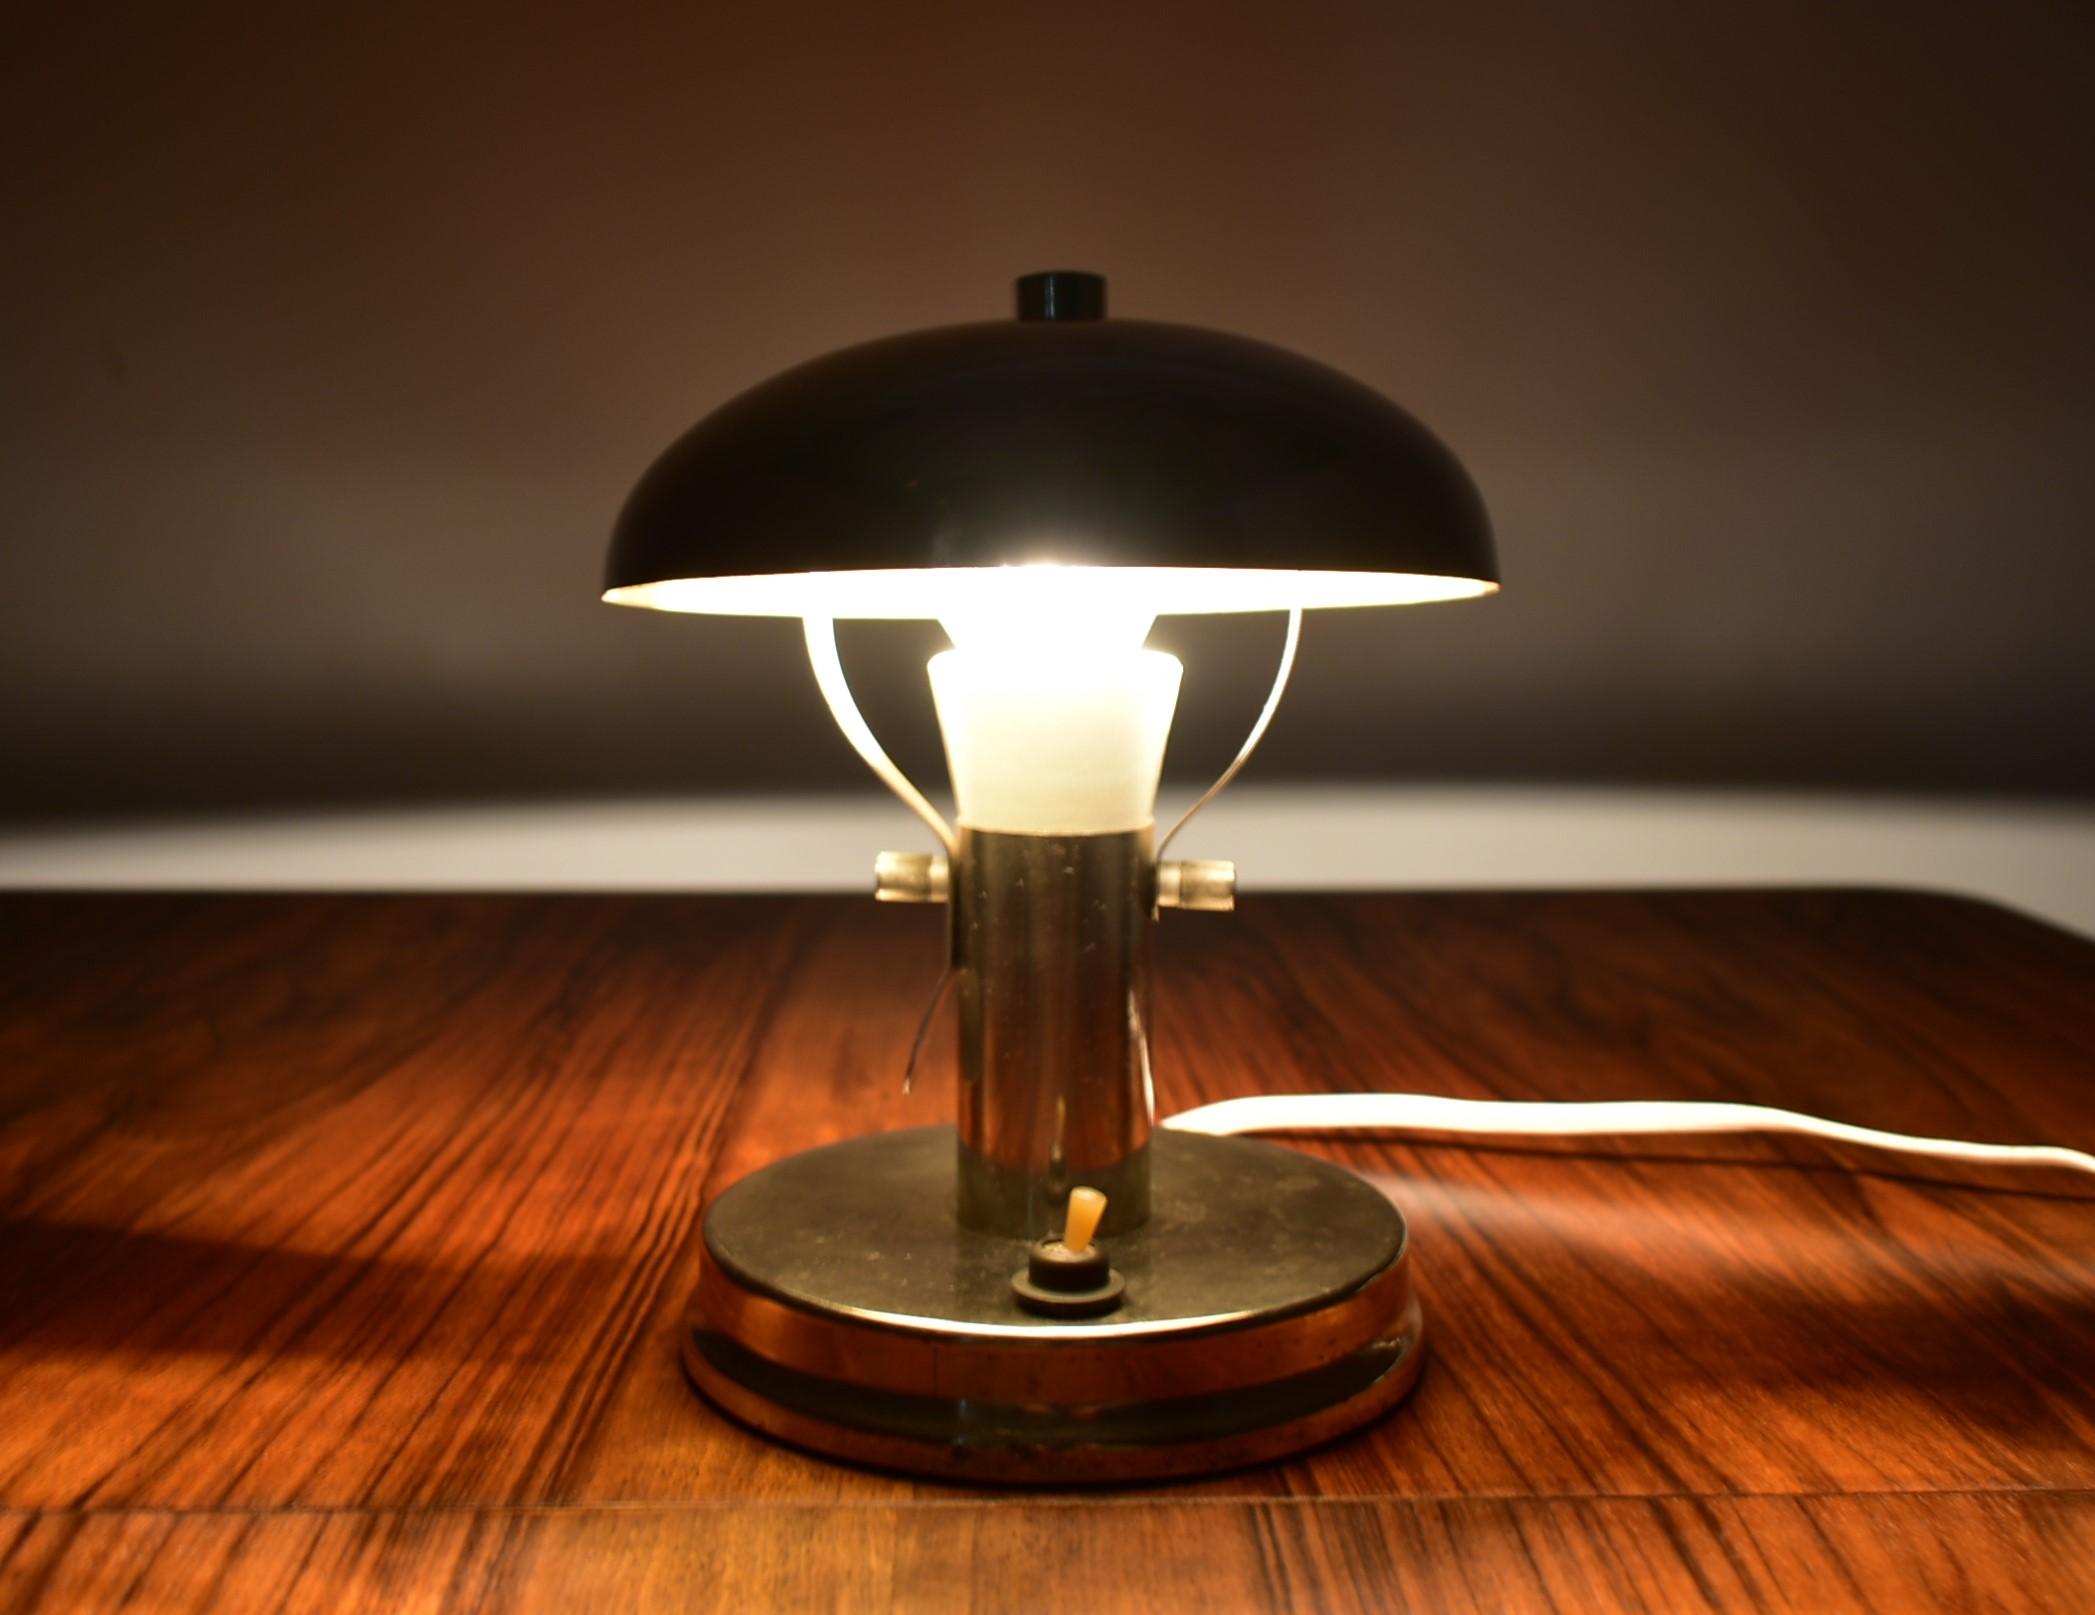 The chrome mushroom shaped adjustable table lamp is a great example of Czech lighting from the 1940s.
Quality, craftsmanship and functionalism in its finest form!
Takes one large Edison bulb E27.